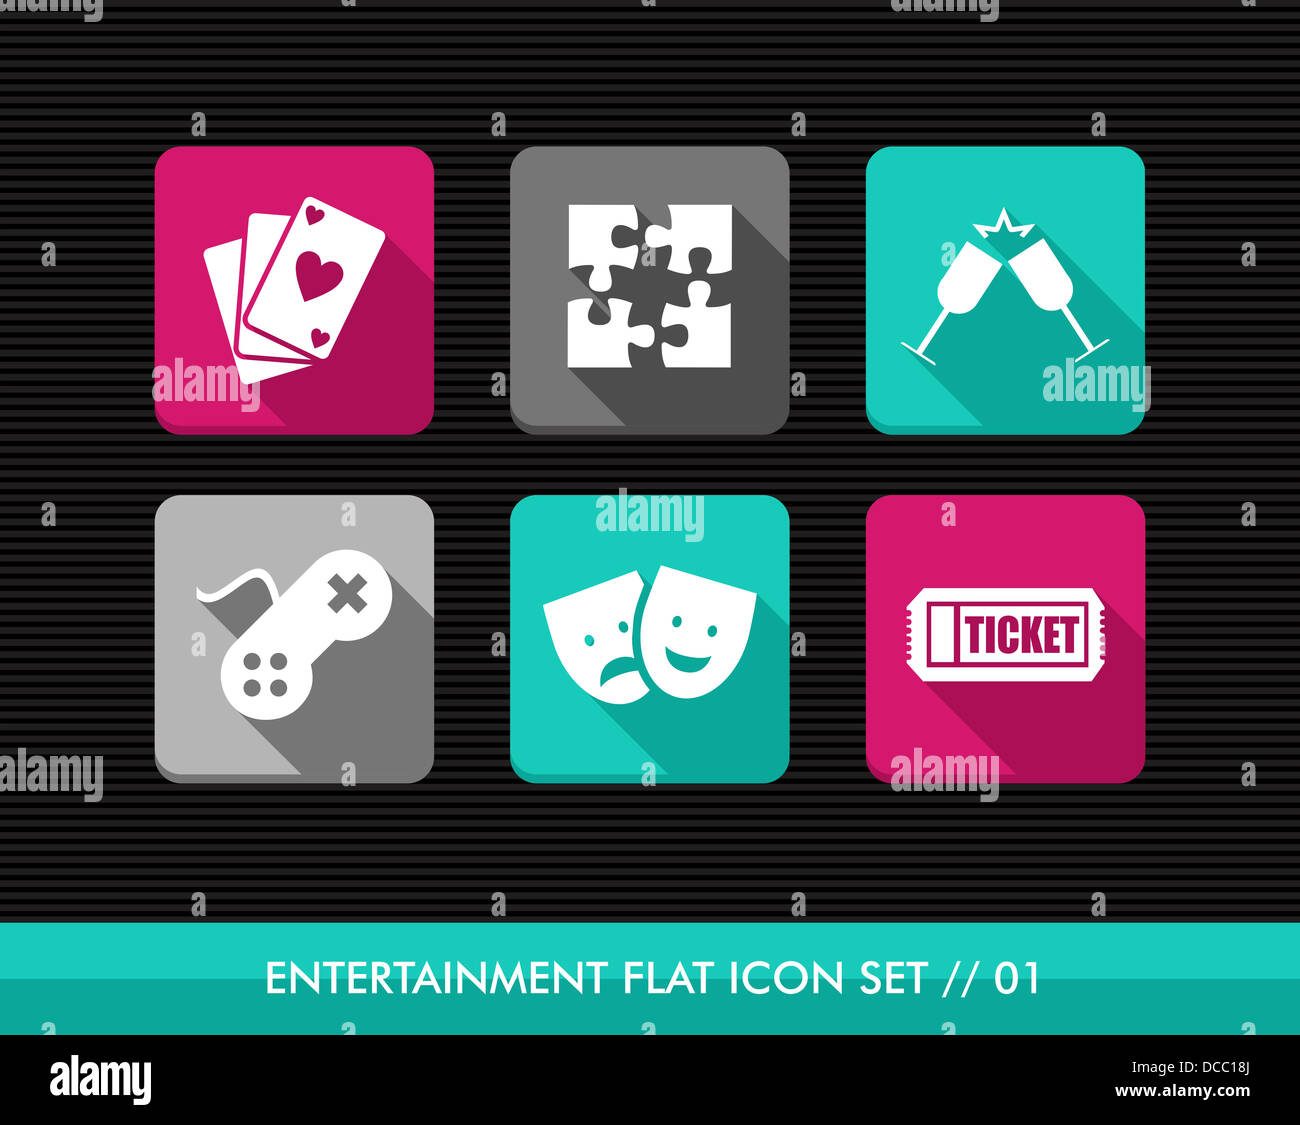 Colorful leisure entertainment flat icon set, online game playing date reservation. Vector file layered for easy editing. Stock Photo